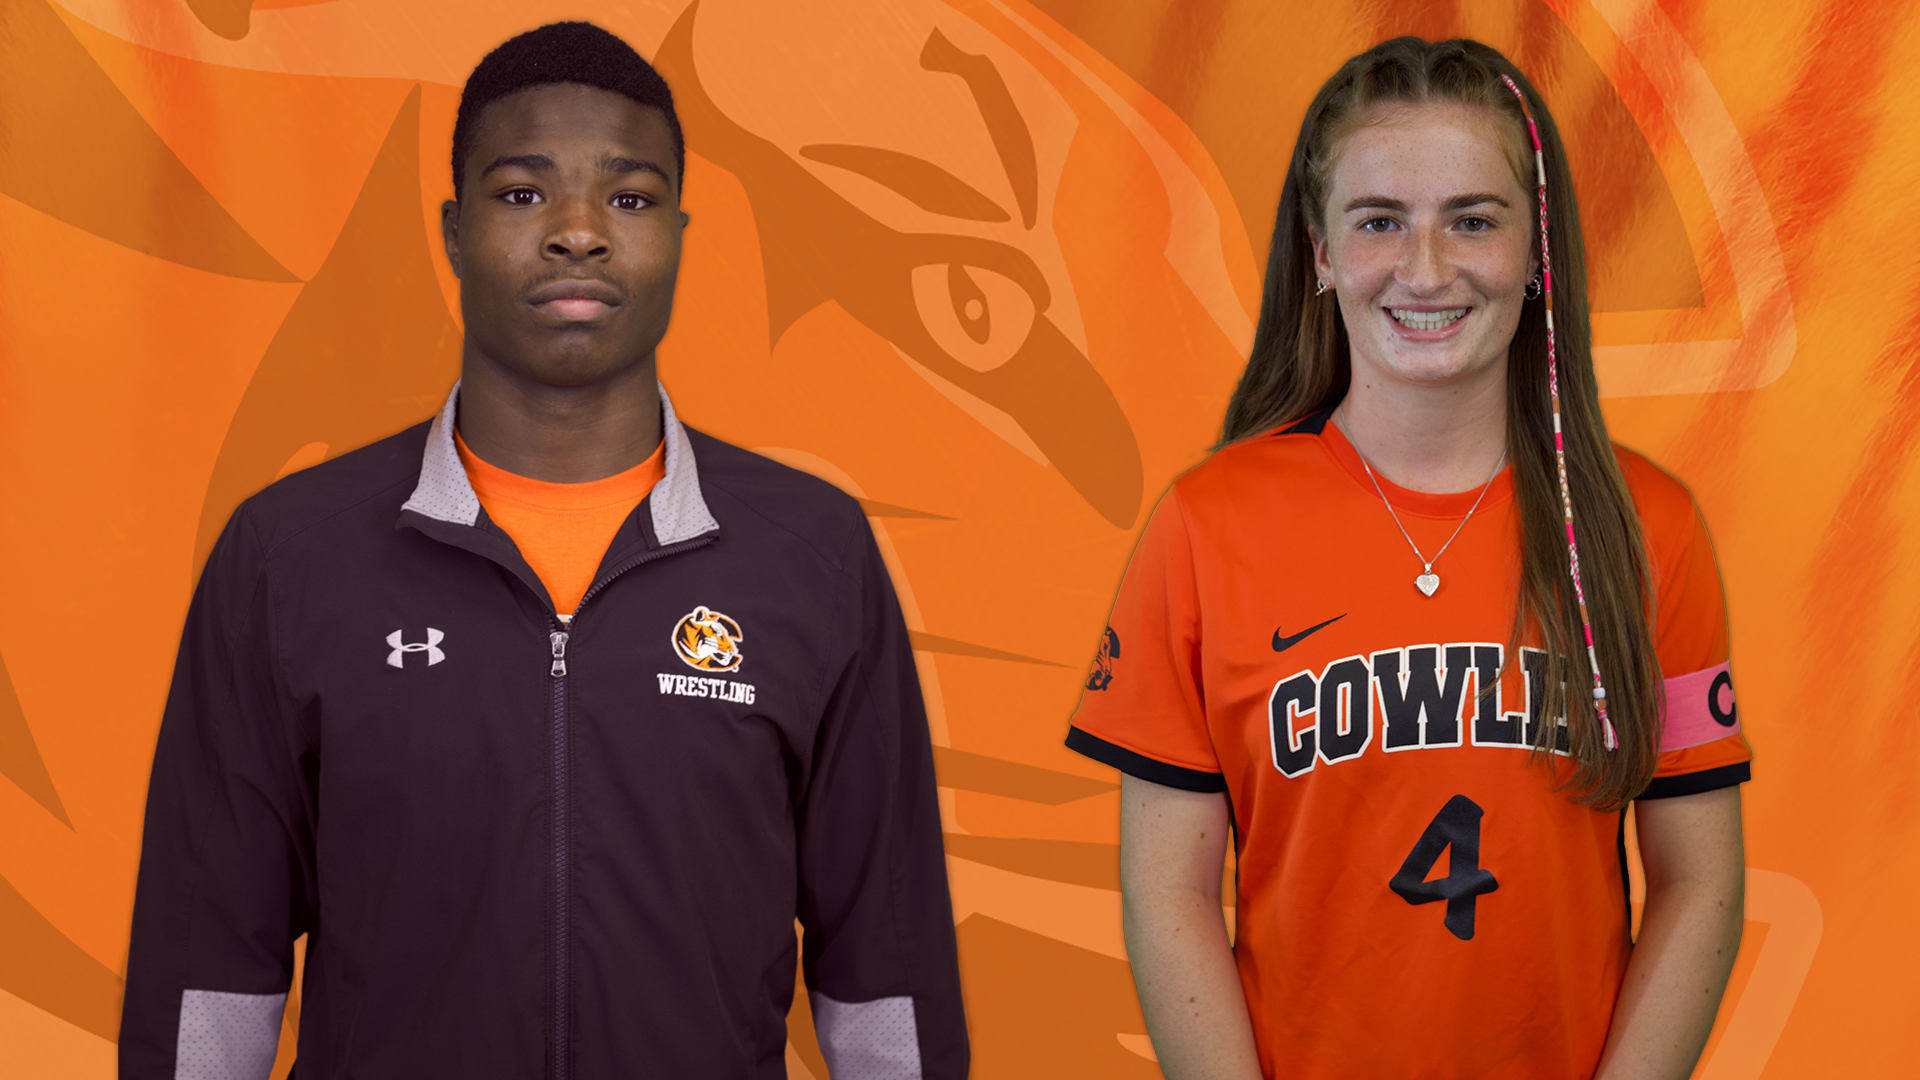 Powe, Attwood named January 2023 Athletes of the Month